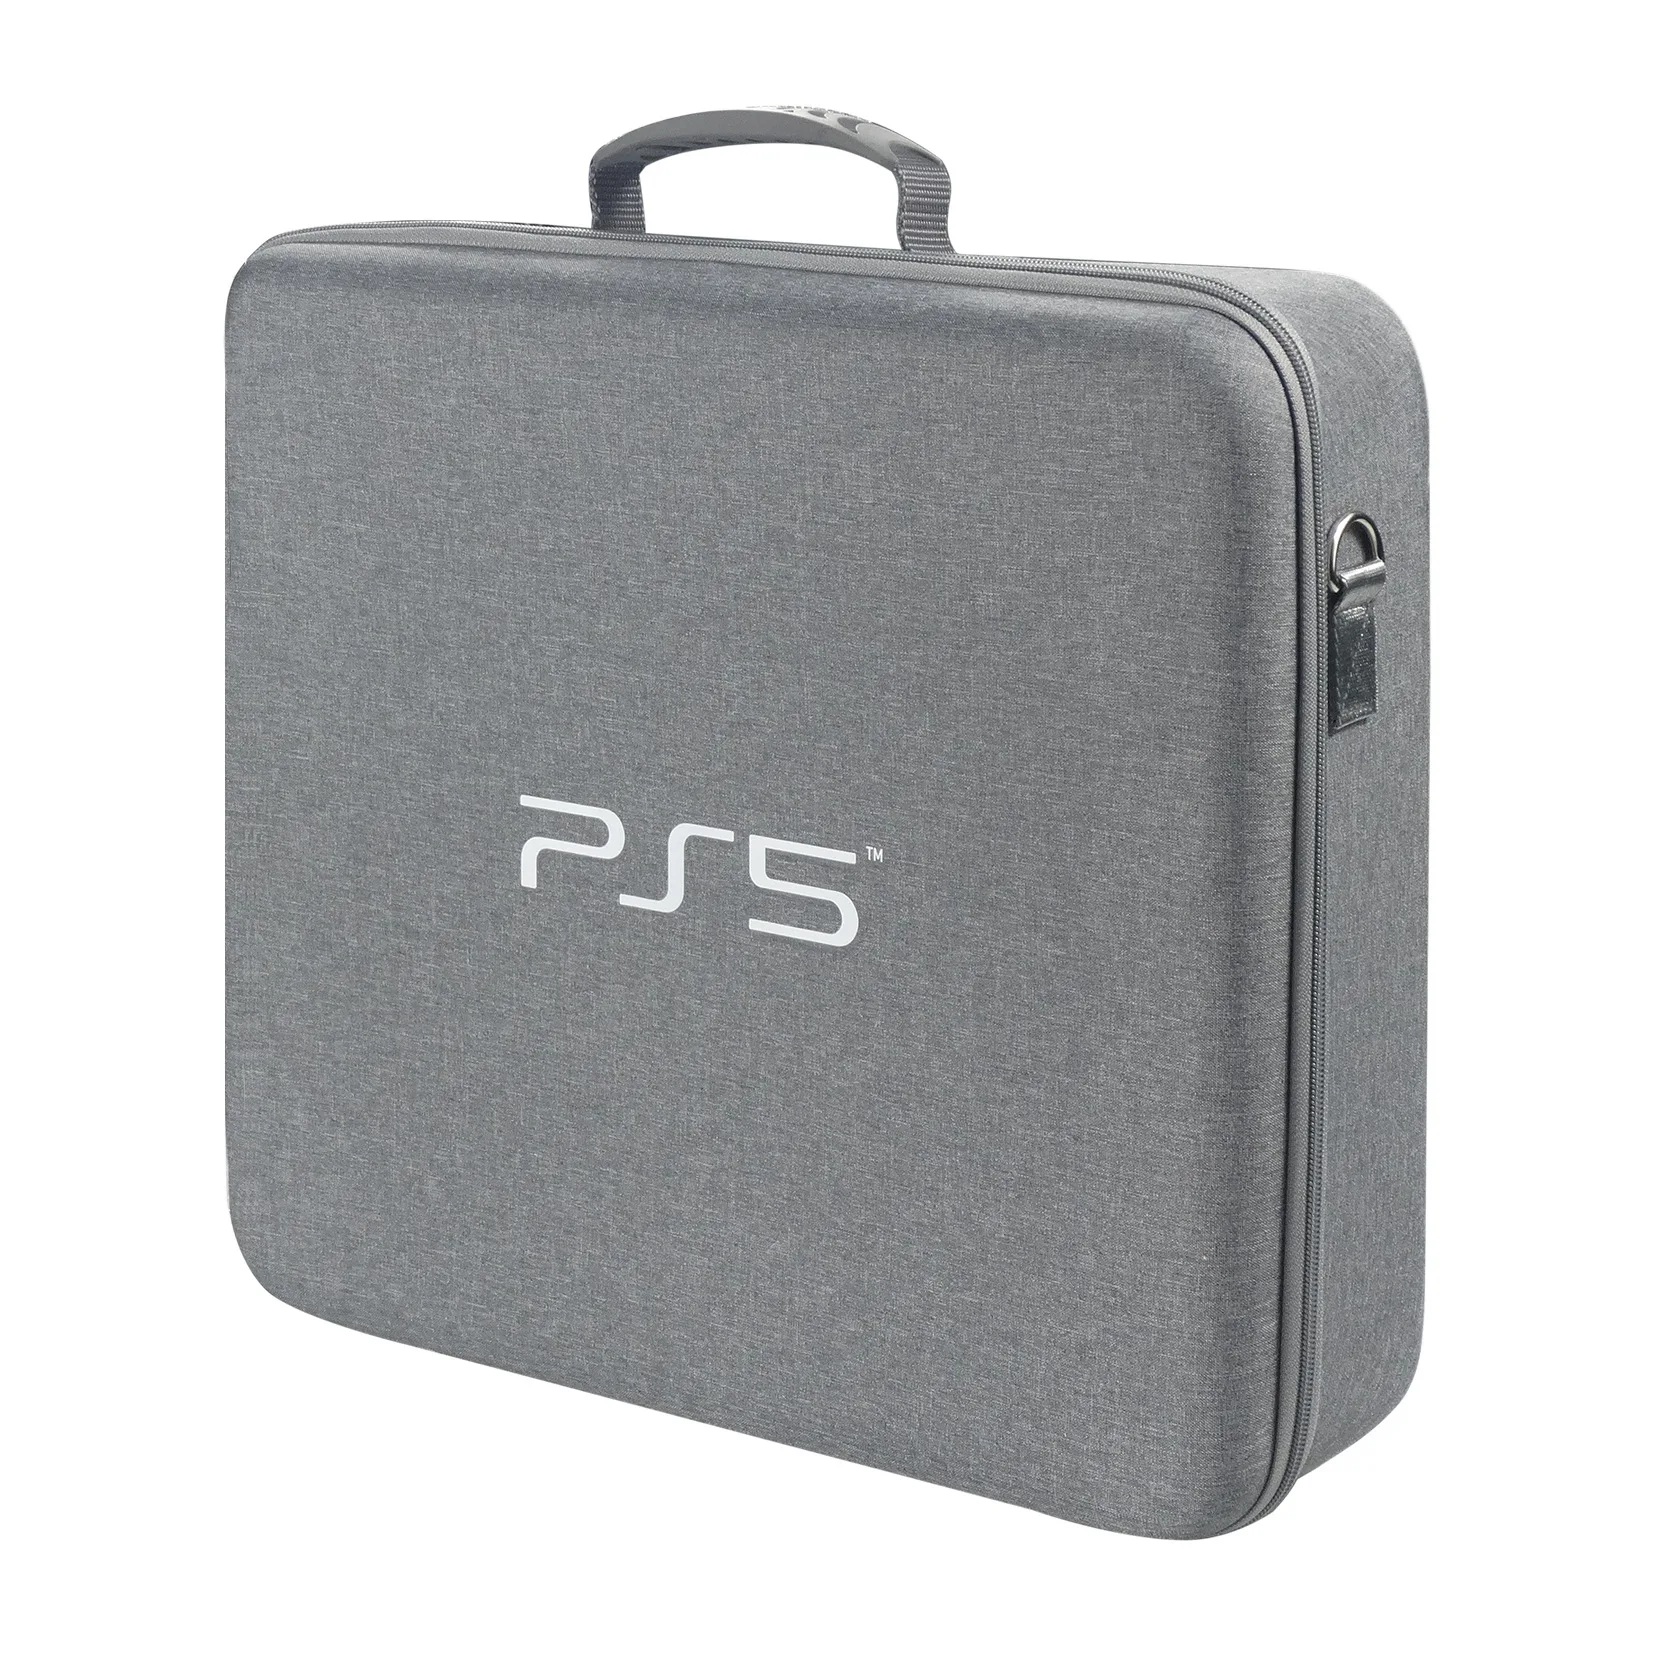 Sideways Drill Hollow Protective Shoulder Bag For Sony Playstation 5 Ps5 Game Console Storage Bag  Travel Carrying Case For Ps5 - Buy Ps5 Carrying Case,Ps5 Travel Case,Ps5  Shoulder Bag Product on Alibaba.com